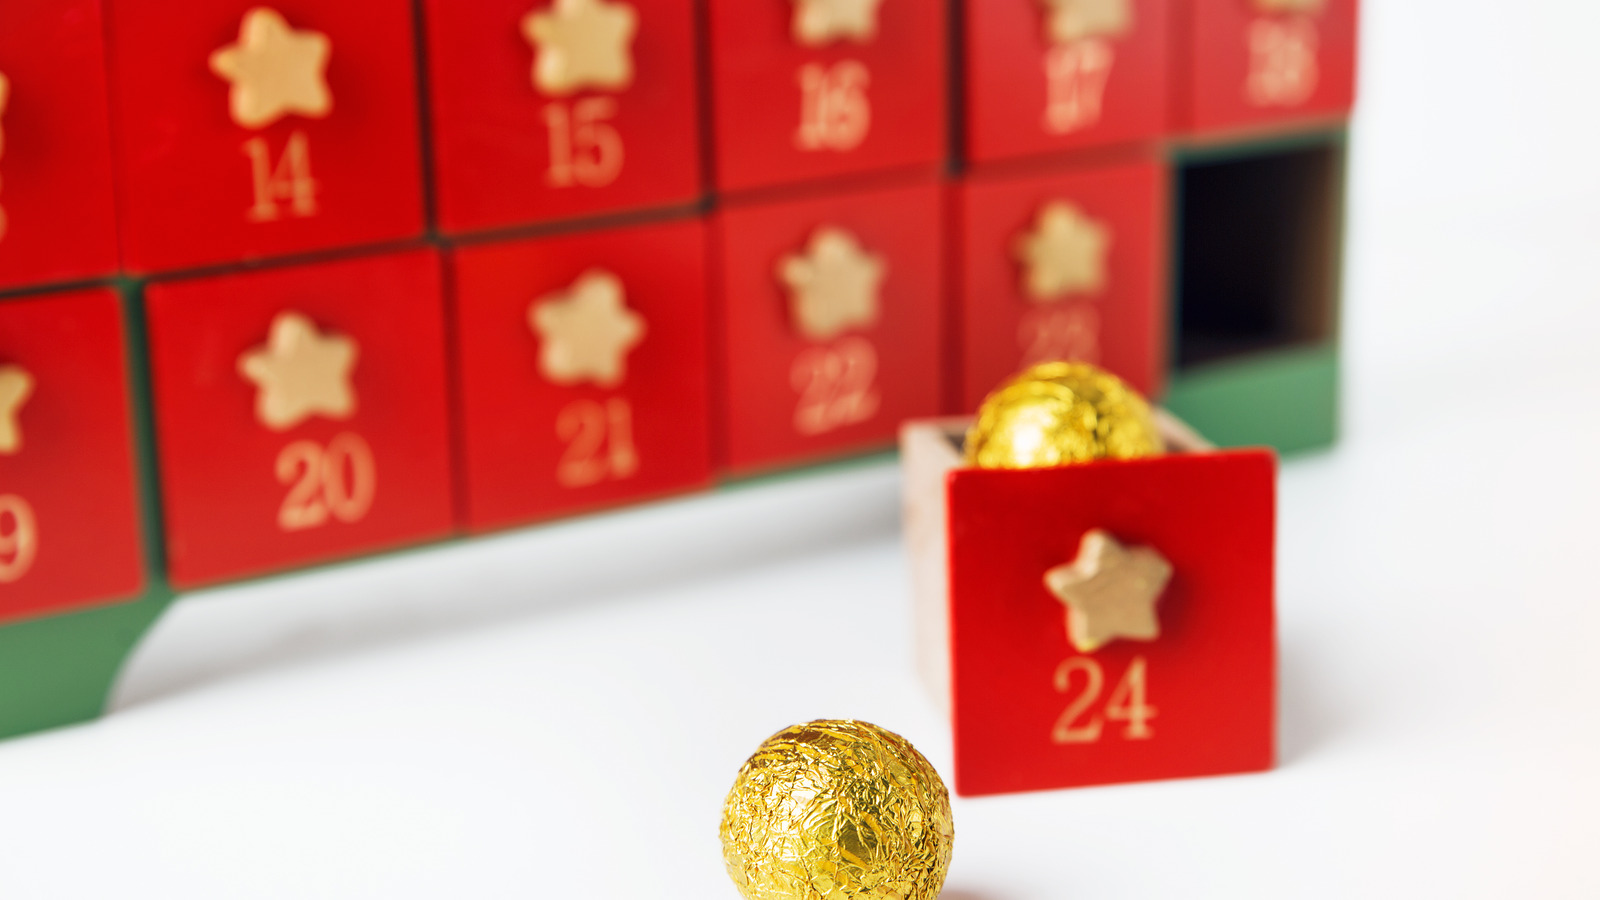 Lidl Advent Calendar Recall The Salmonella Risk You Should Know About